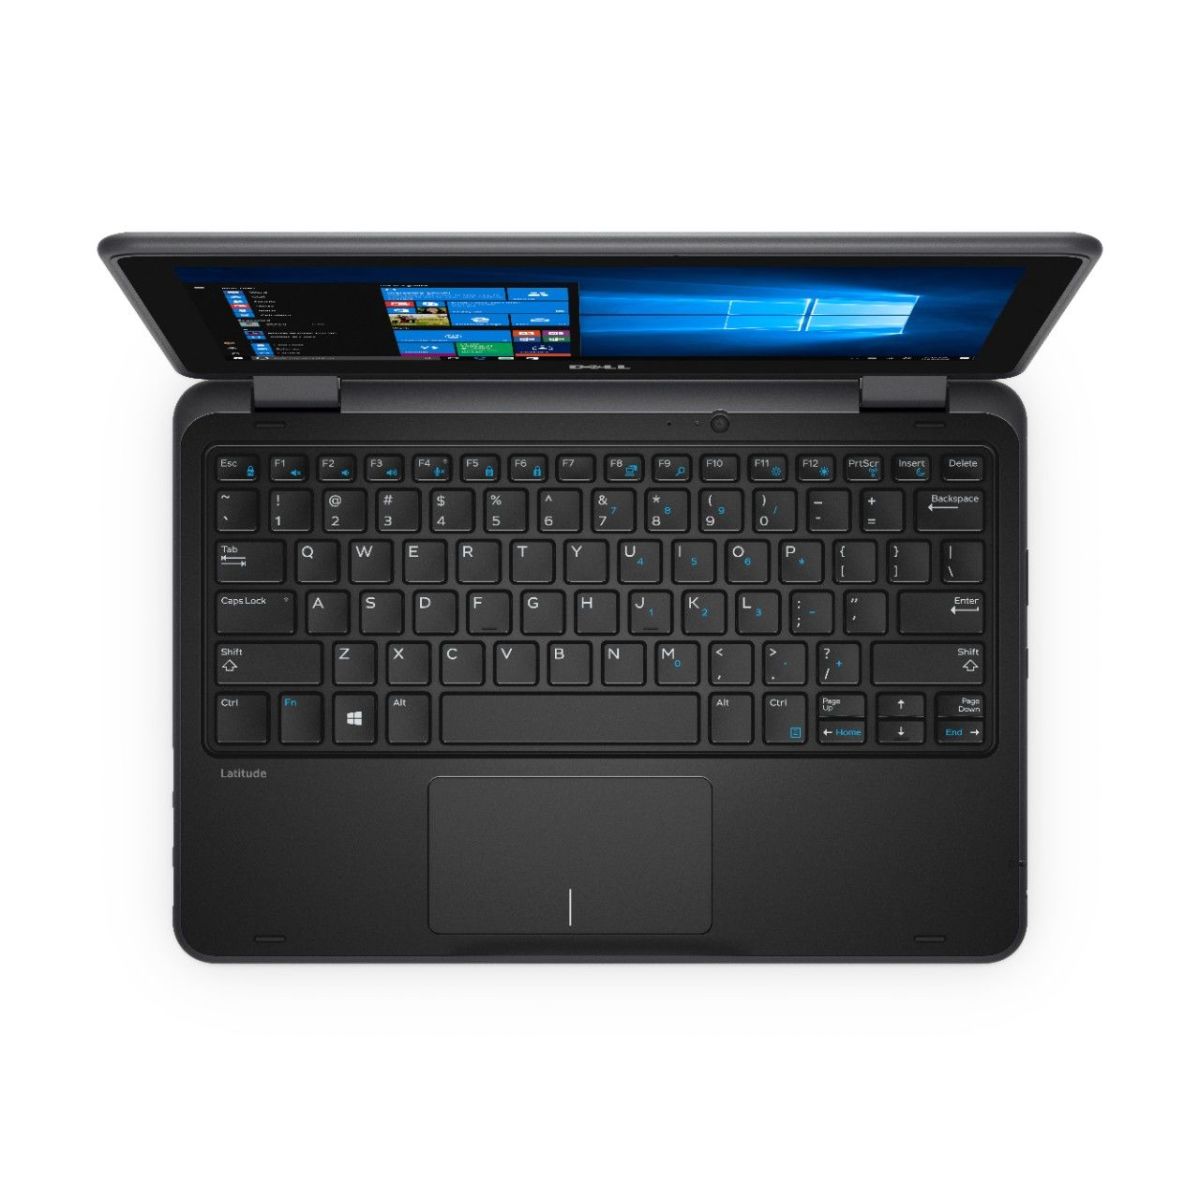 DELL Latitude 3189 - 3RGF2 laptop specifications